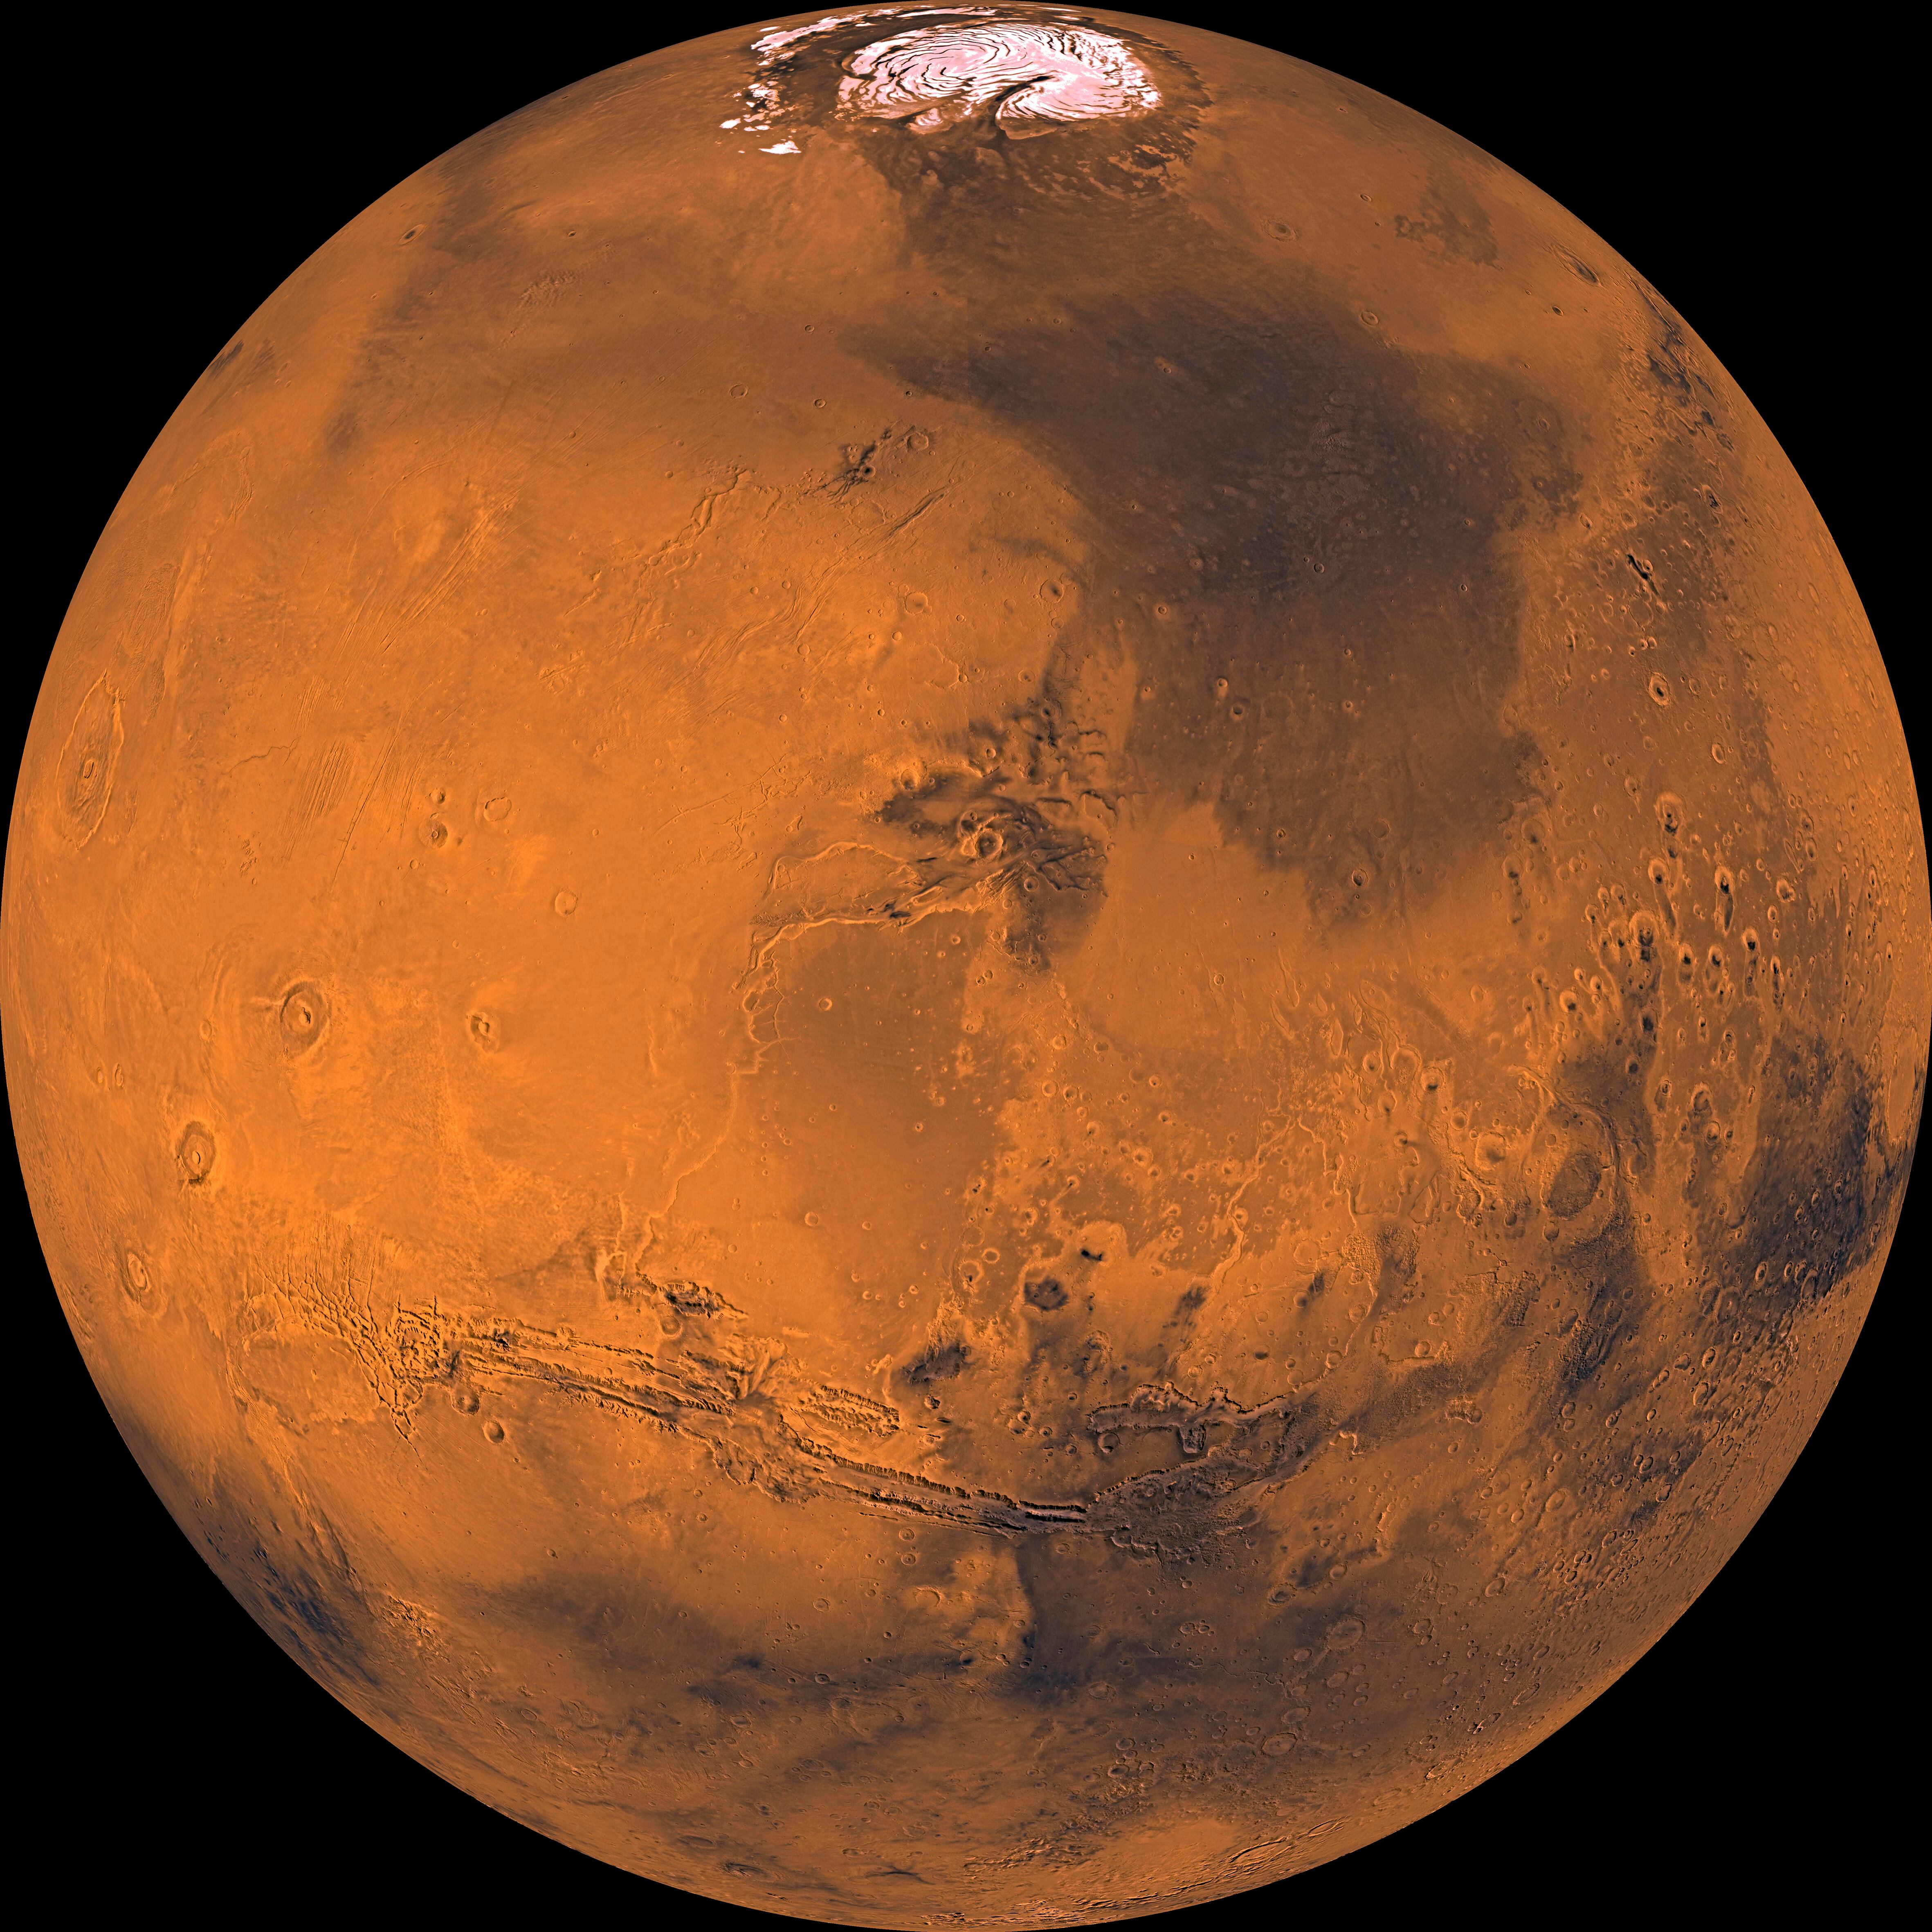 Areas of Mars’s surface are more than three billion years old.